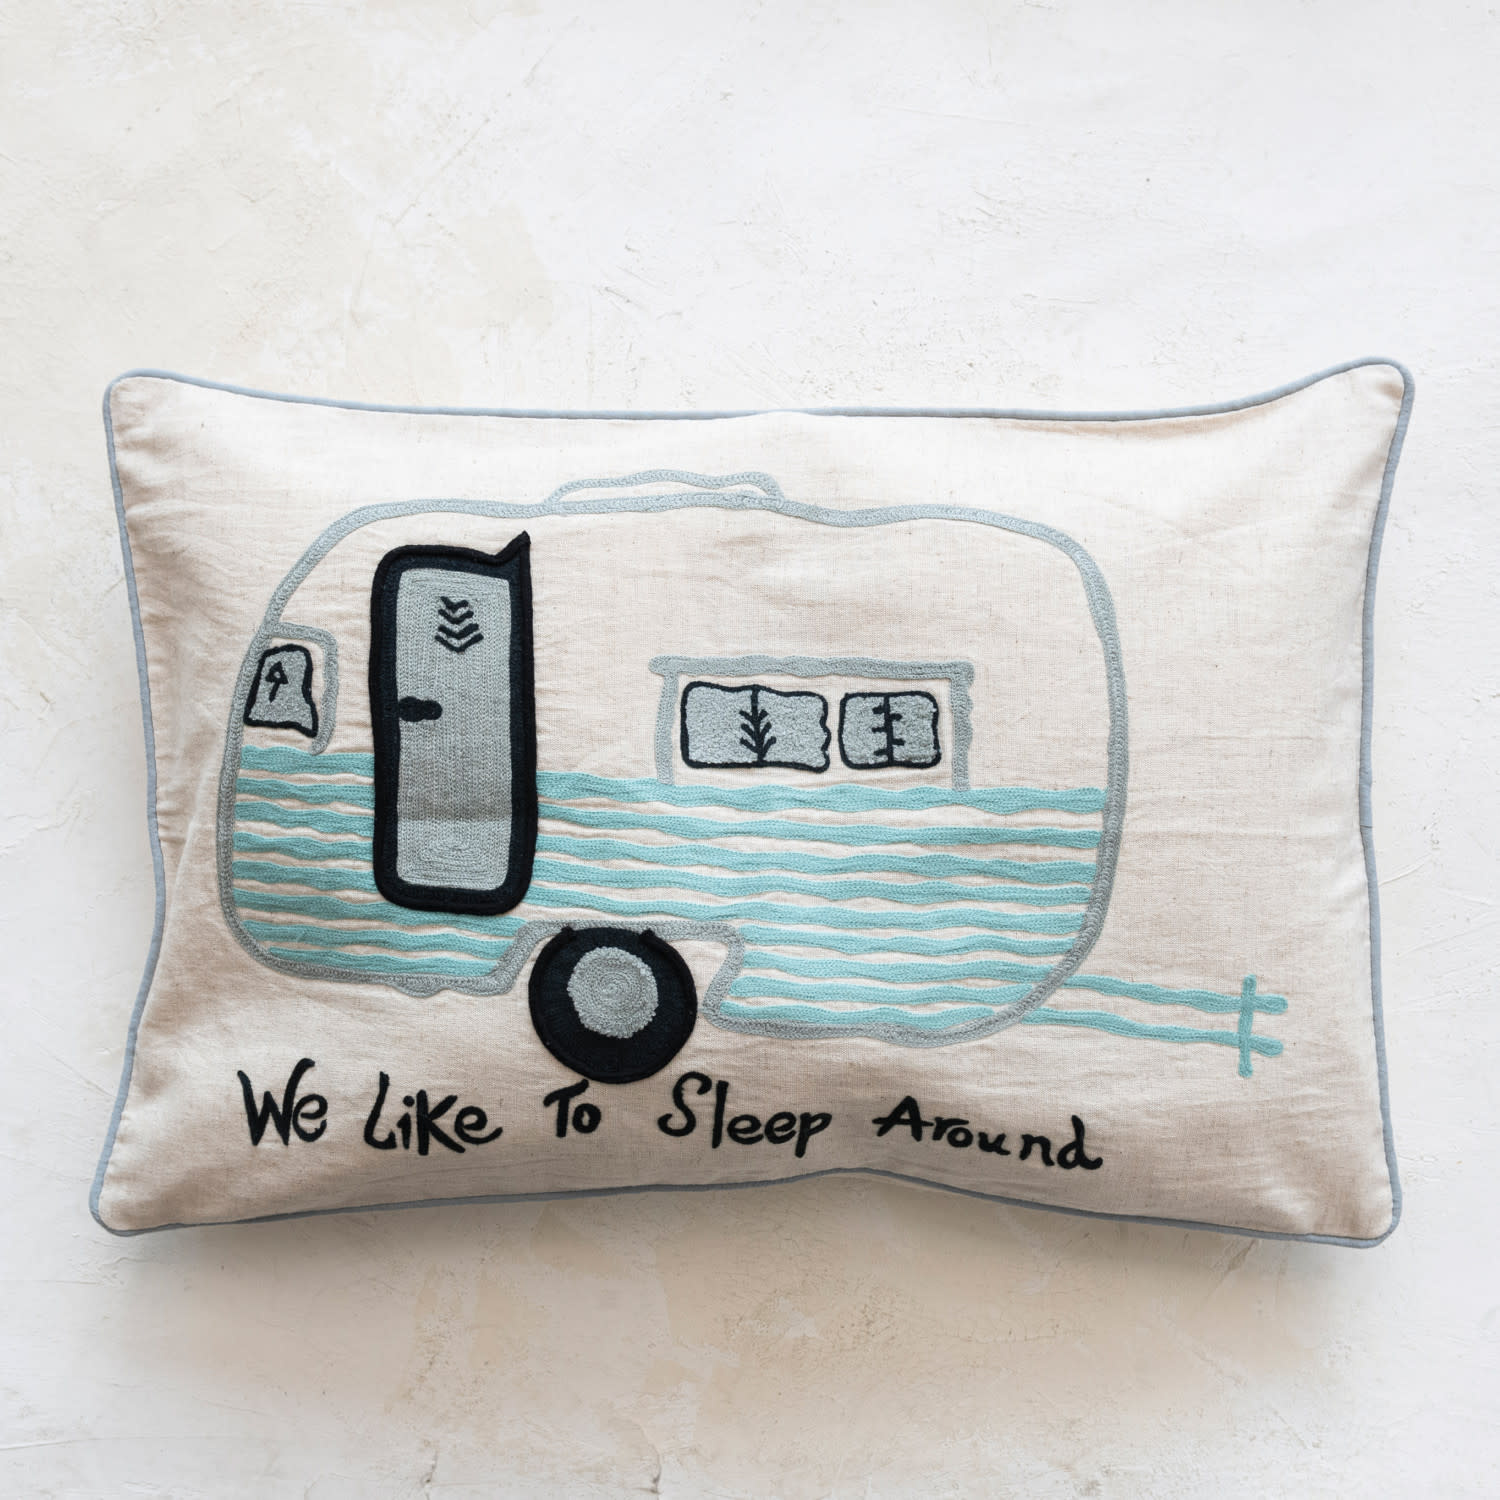 16"L x 24"H Pillow  w/ Embroidered Camper